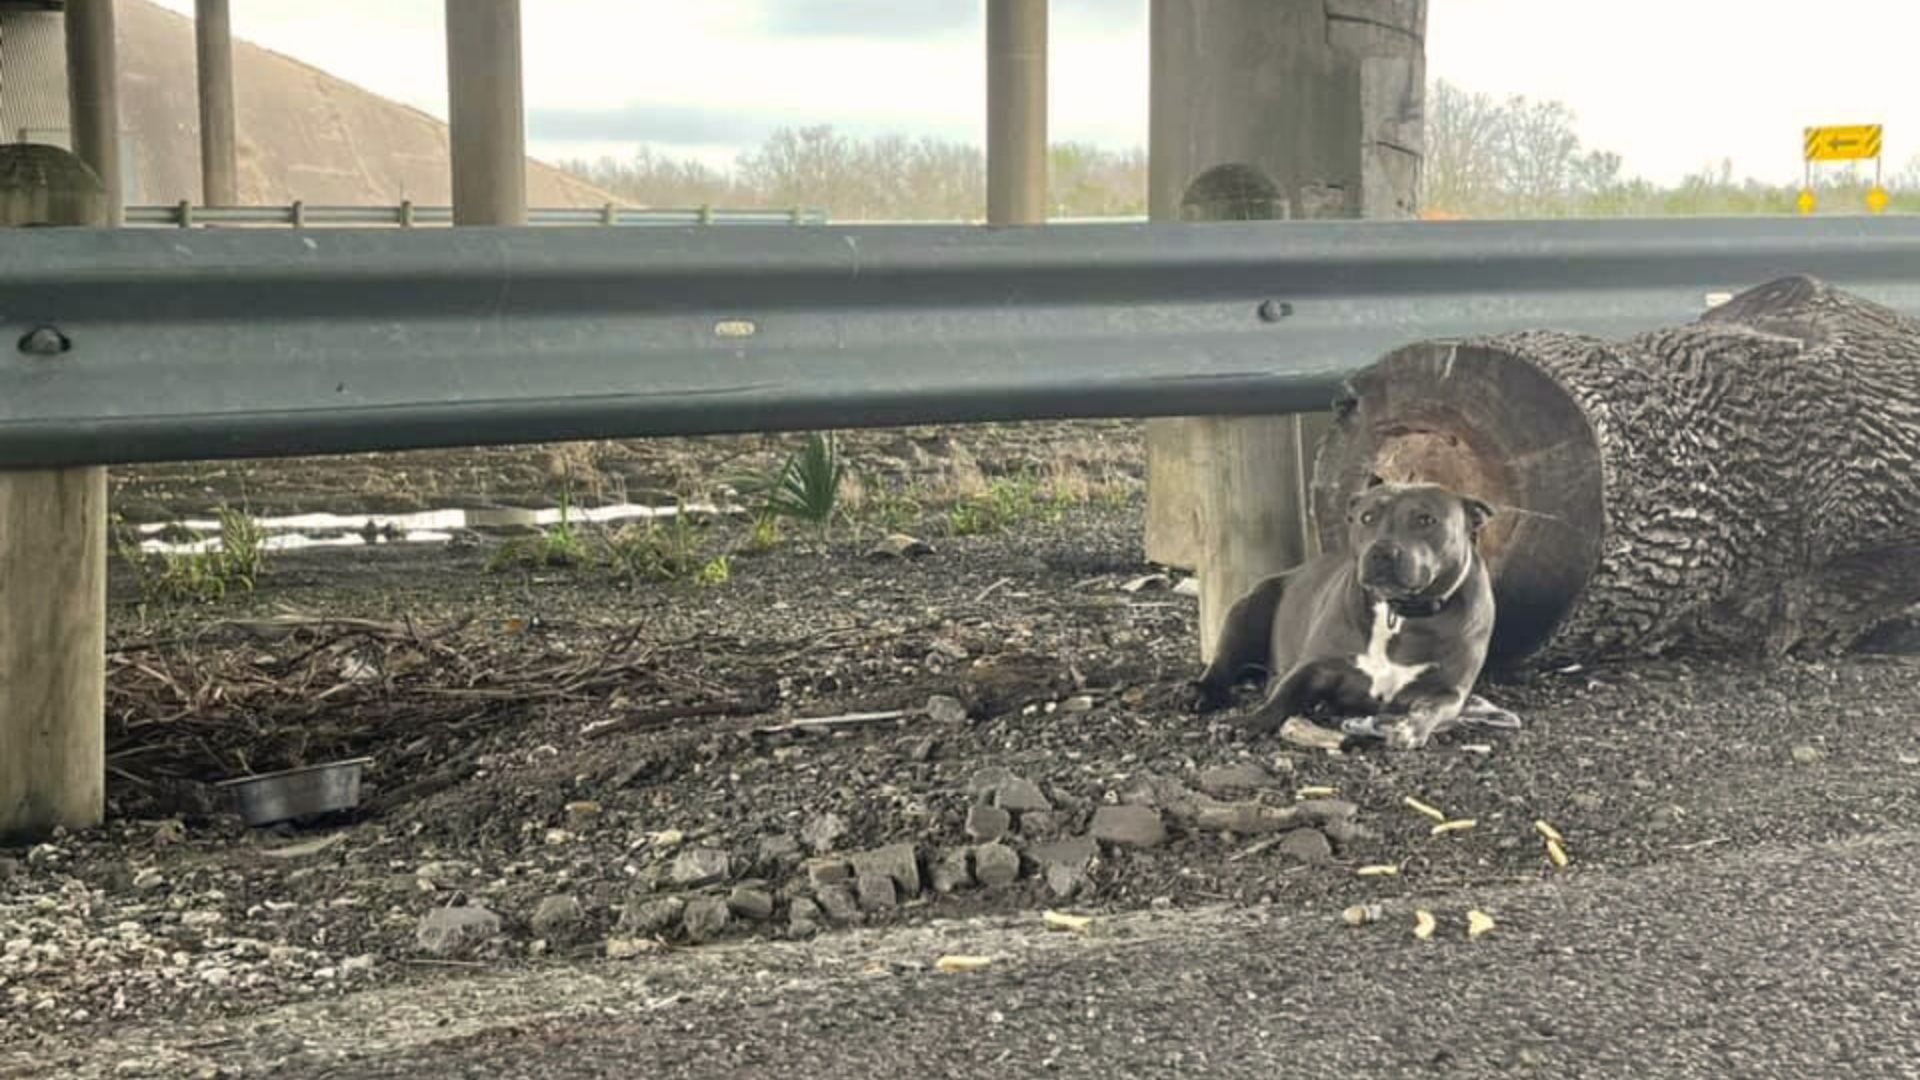 An Owner Cruelly Abandoned A Pittie Girl Under A Freeway Overpass